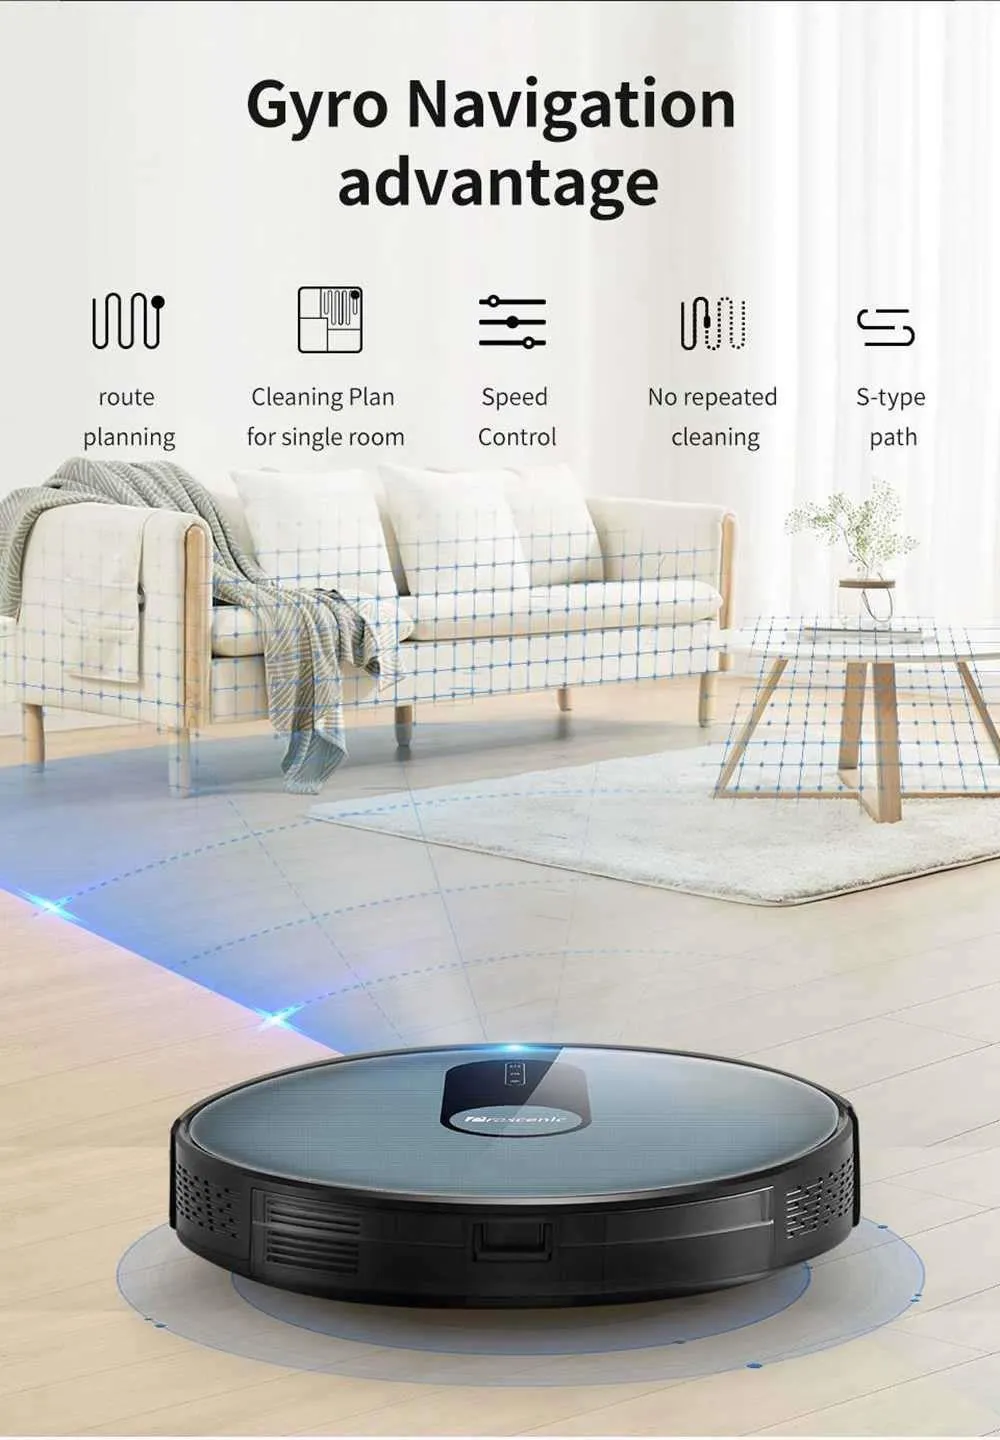 Robot Vacuum Cleaner Proscenic 820P Smart Planned Carpet Cleaner 1800Pa Suction with Wet Cleaning Washing Smart Robot for Home (10)